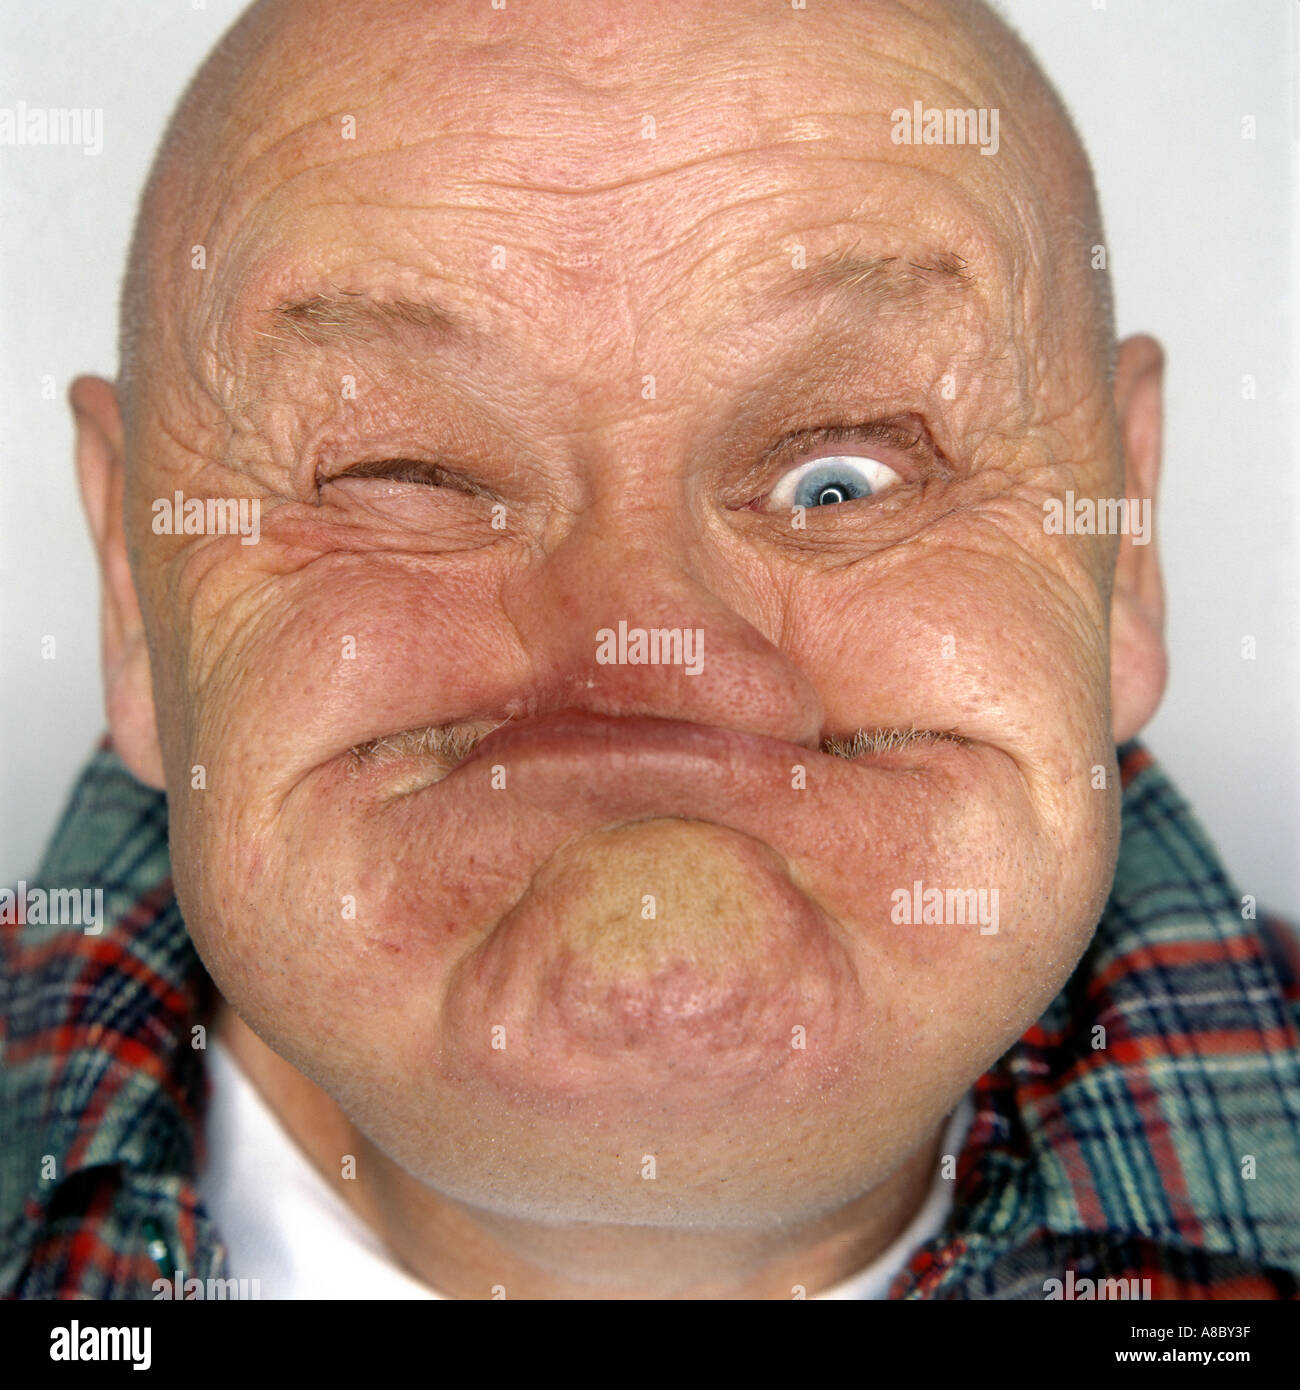 Gurner from the annual world gurning festival in Cumbria UK known as the Whitehaven Egremont Crab Fair Stock Photo